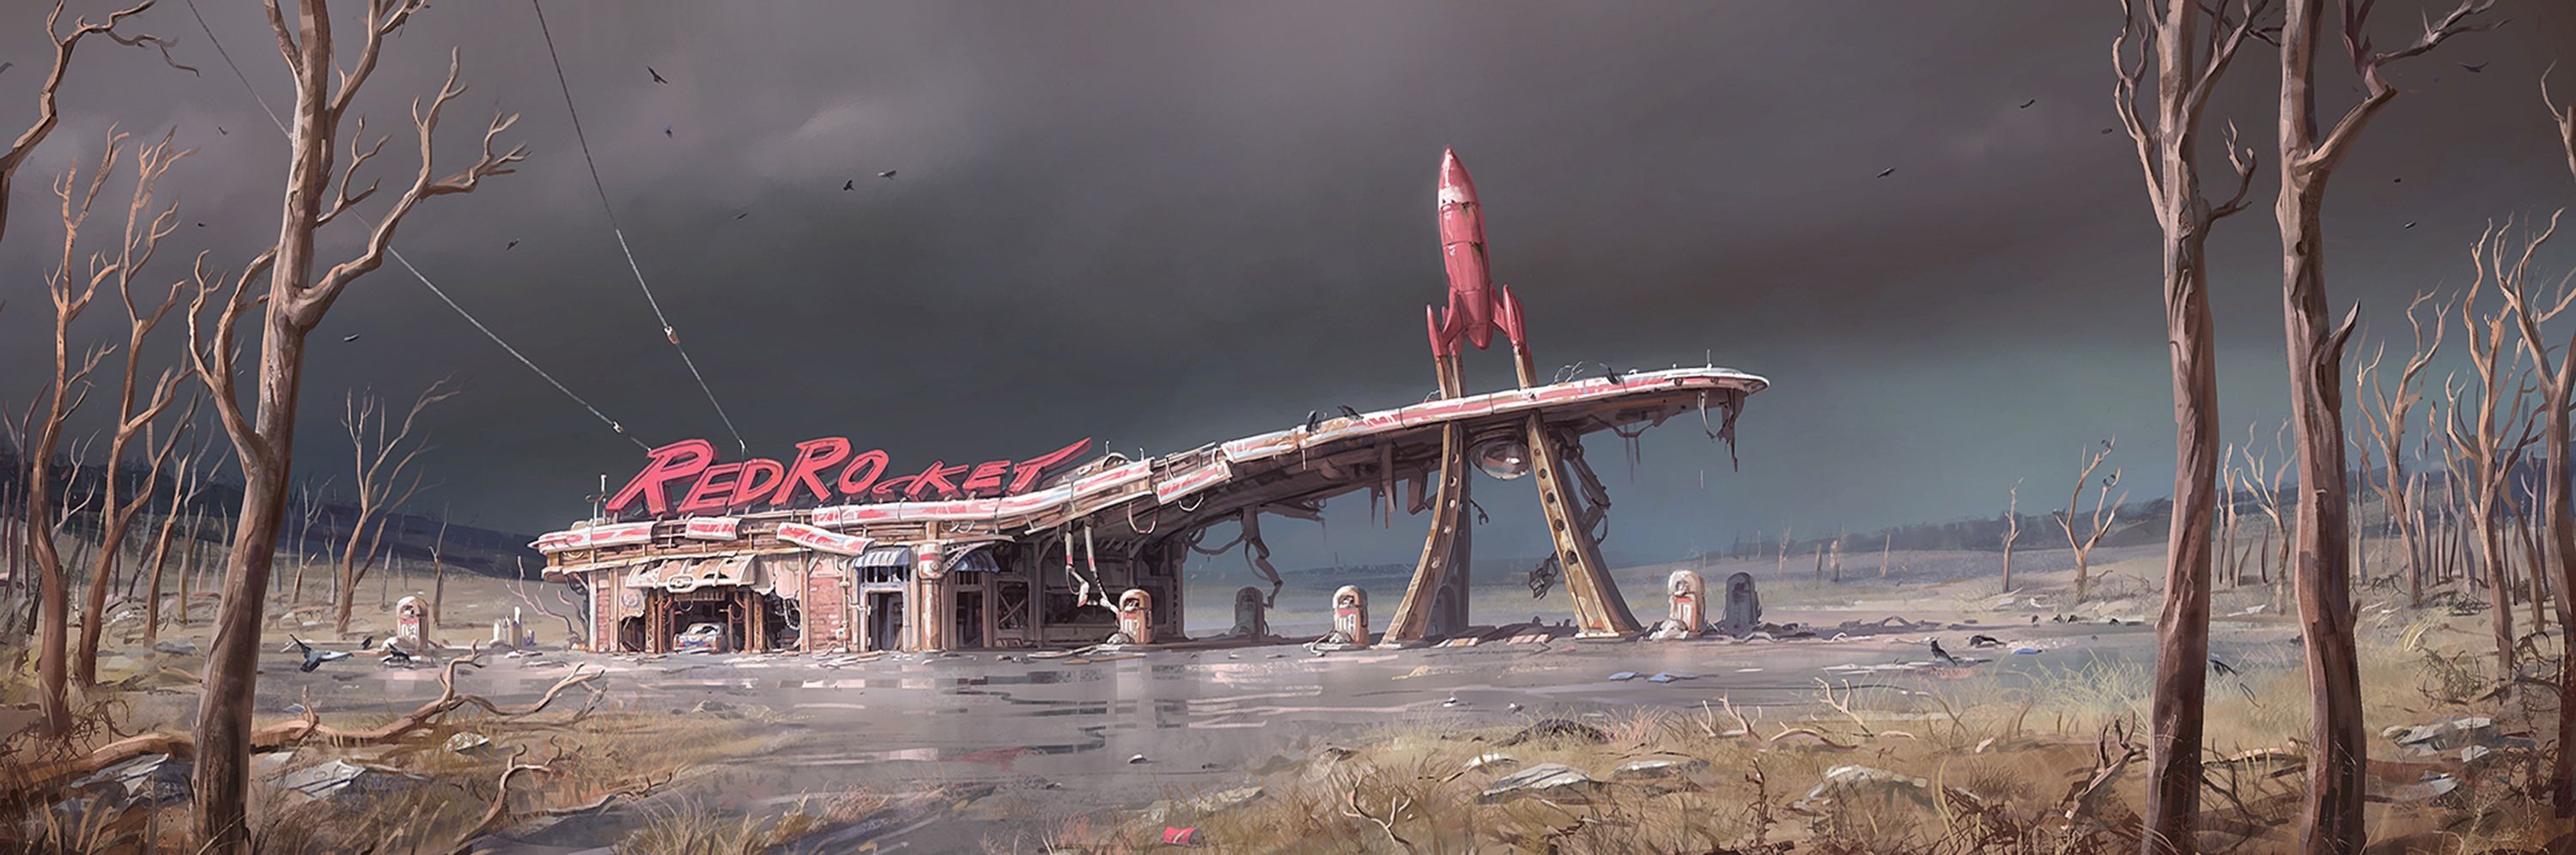 General 3000x996 Fallout 4 concept art video games video game art apocalyptic futuristic PC gaming